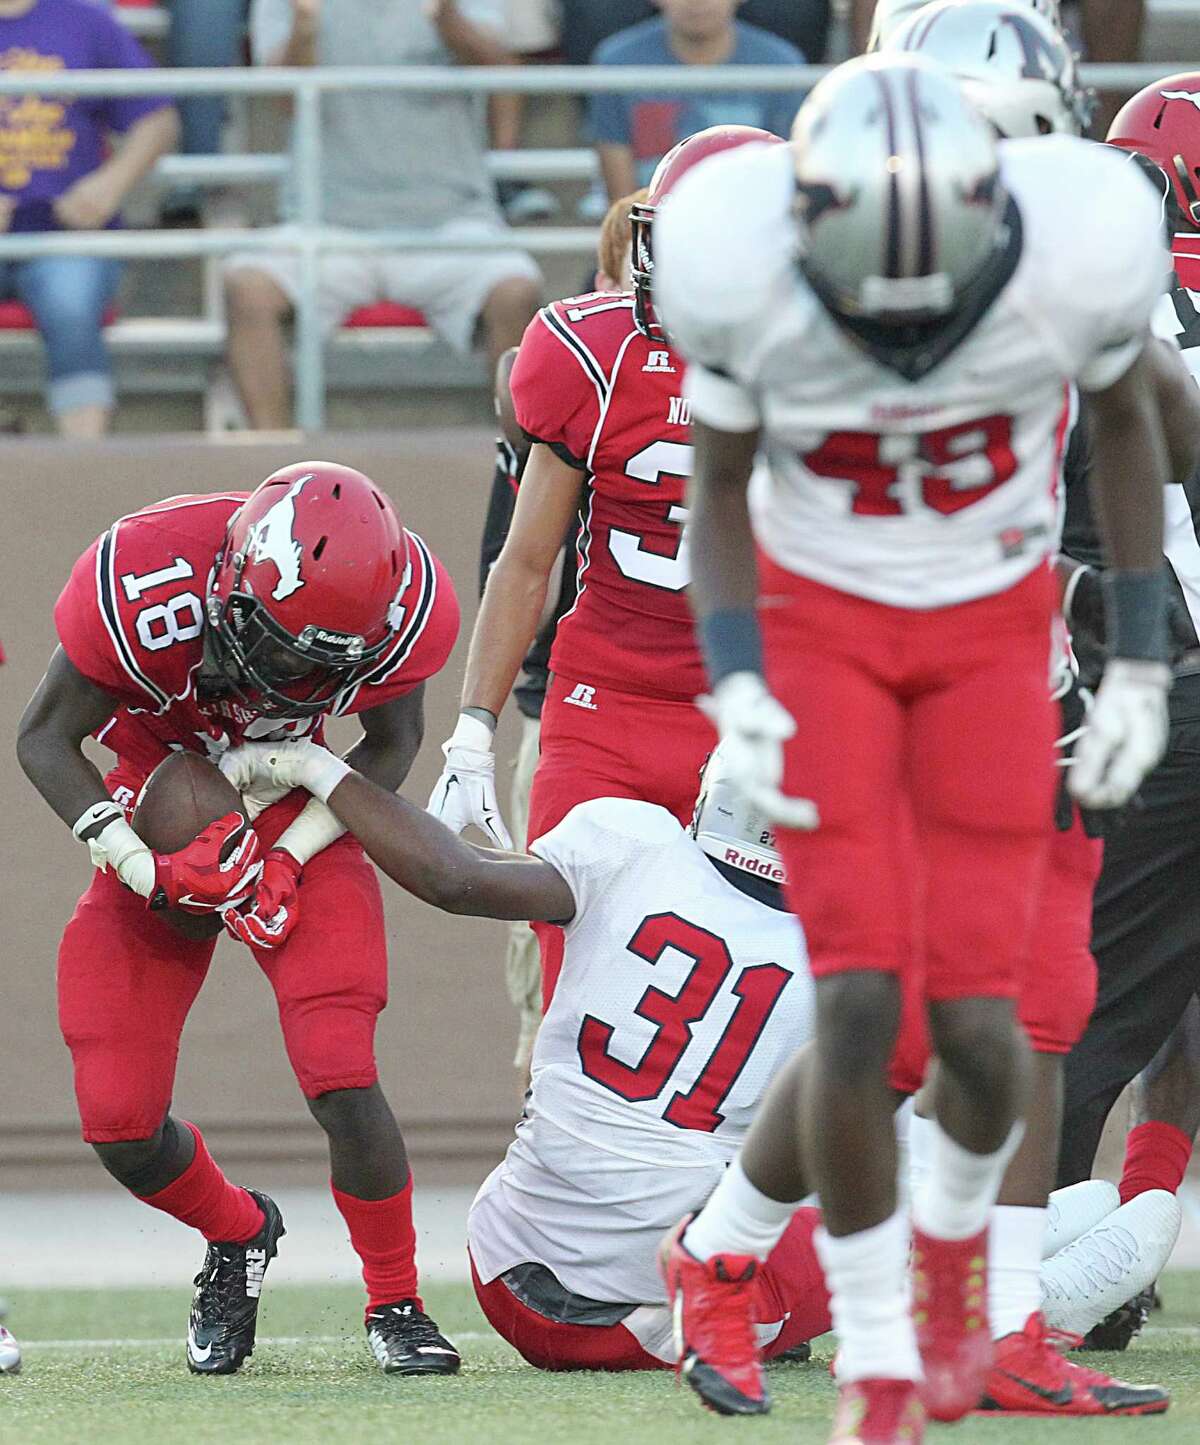 North Shore defensive back Jalen Thomas (18) recovers a Manvel fumble in the first half of what would become a back-and-forth game Friday night.